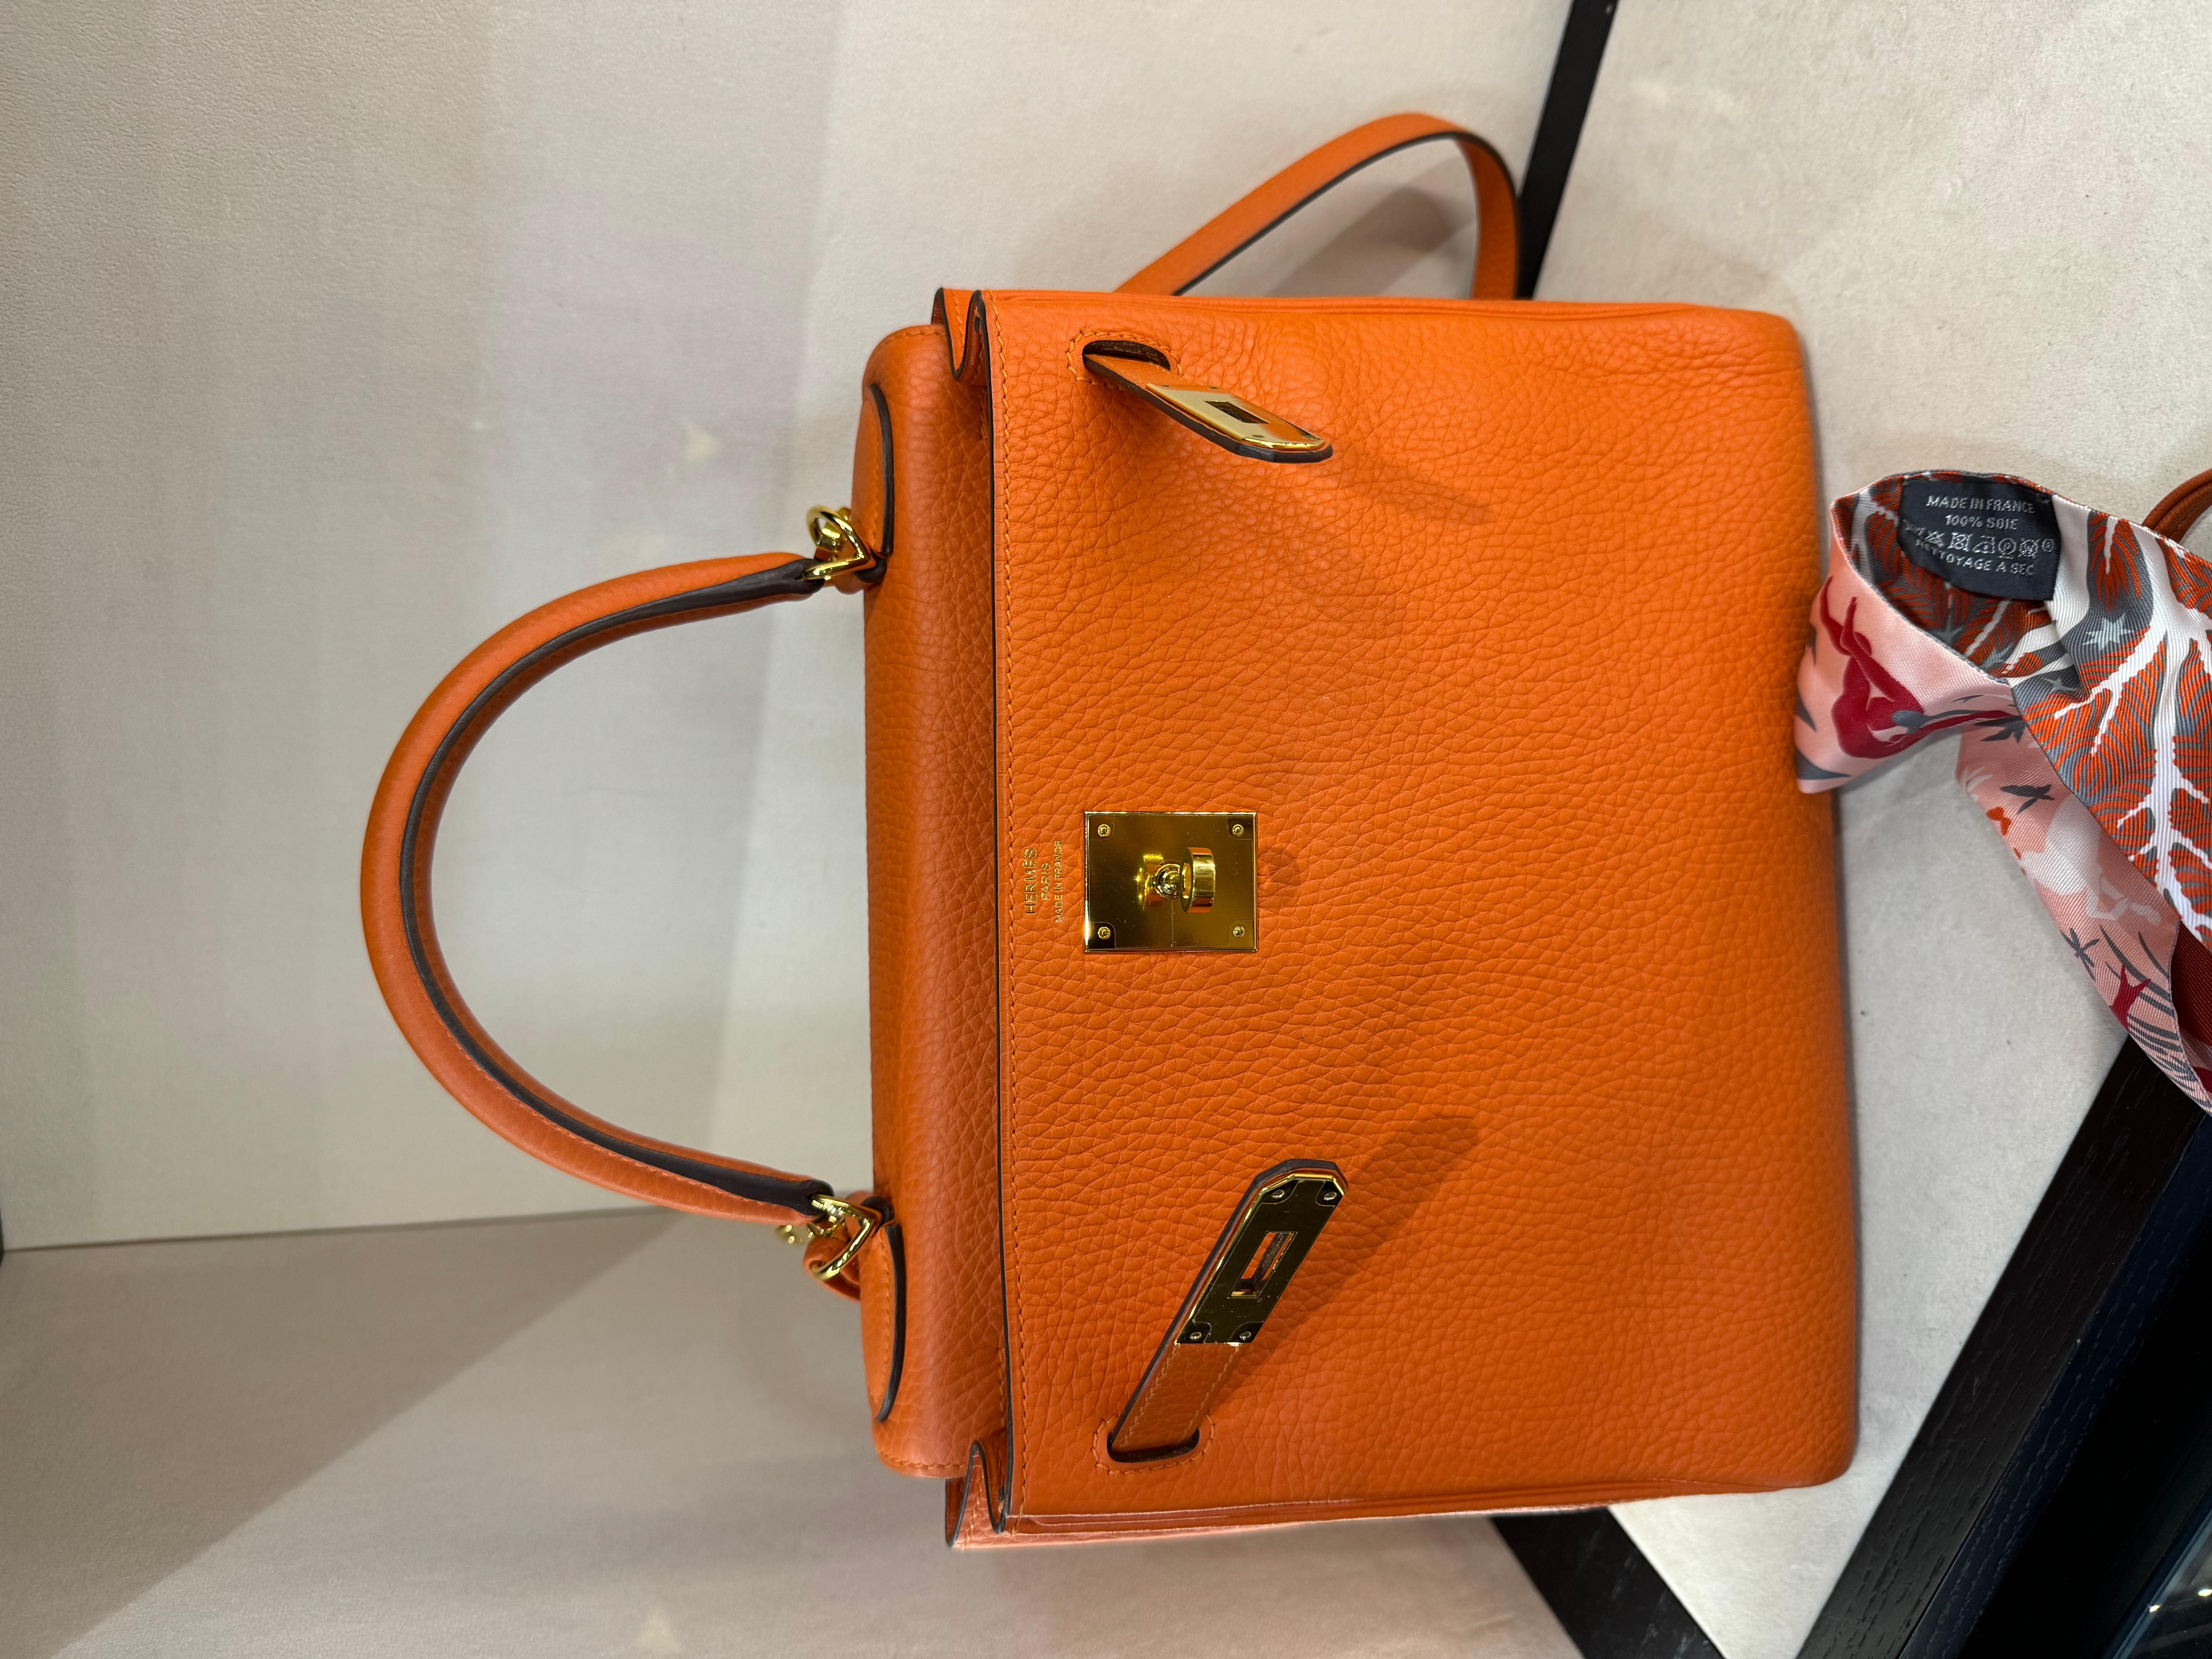 Hermes Kelly 28 Orange Gold Hardware bag In Excellent Condition For Sale In London, England